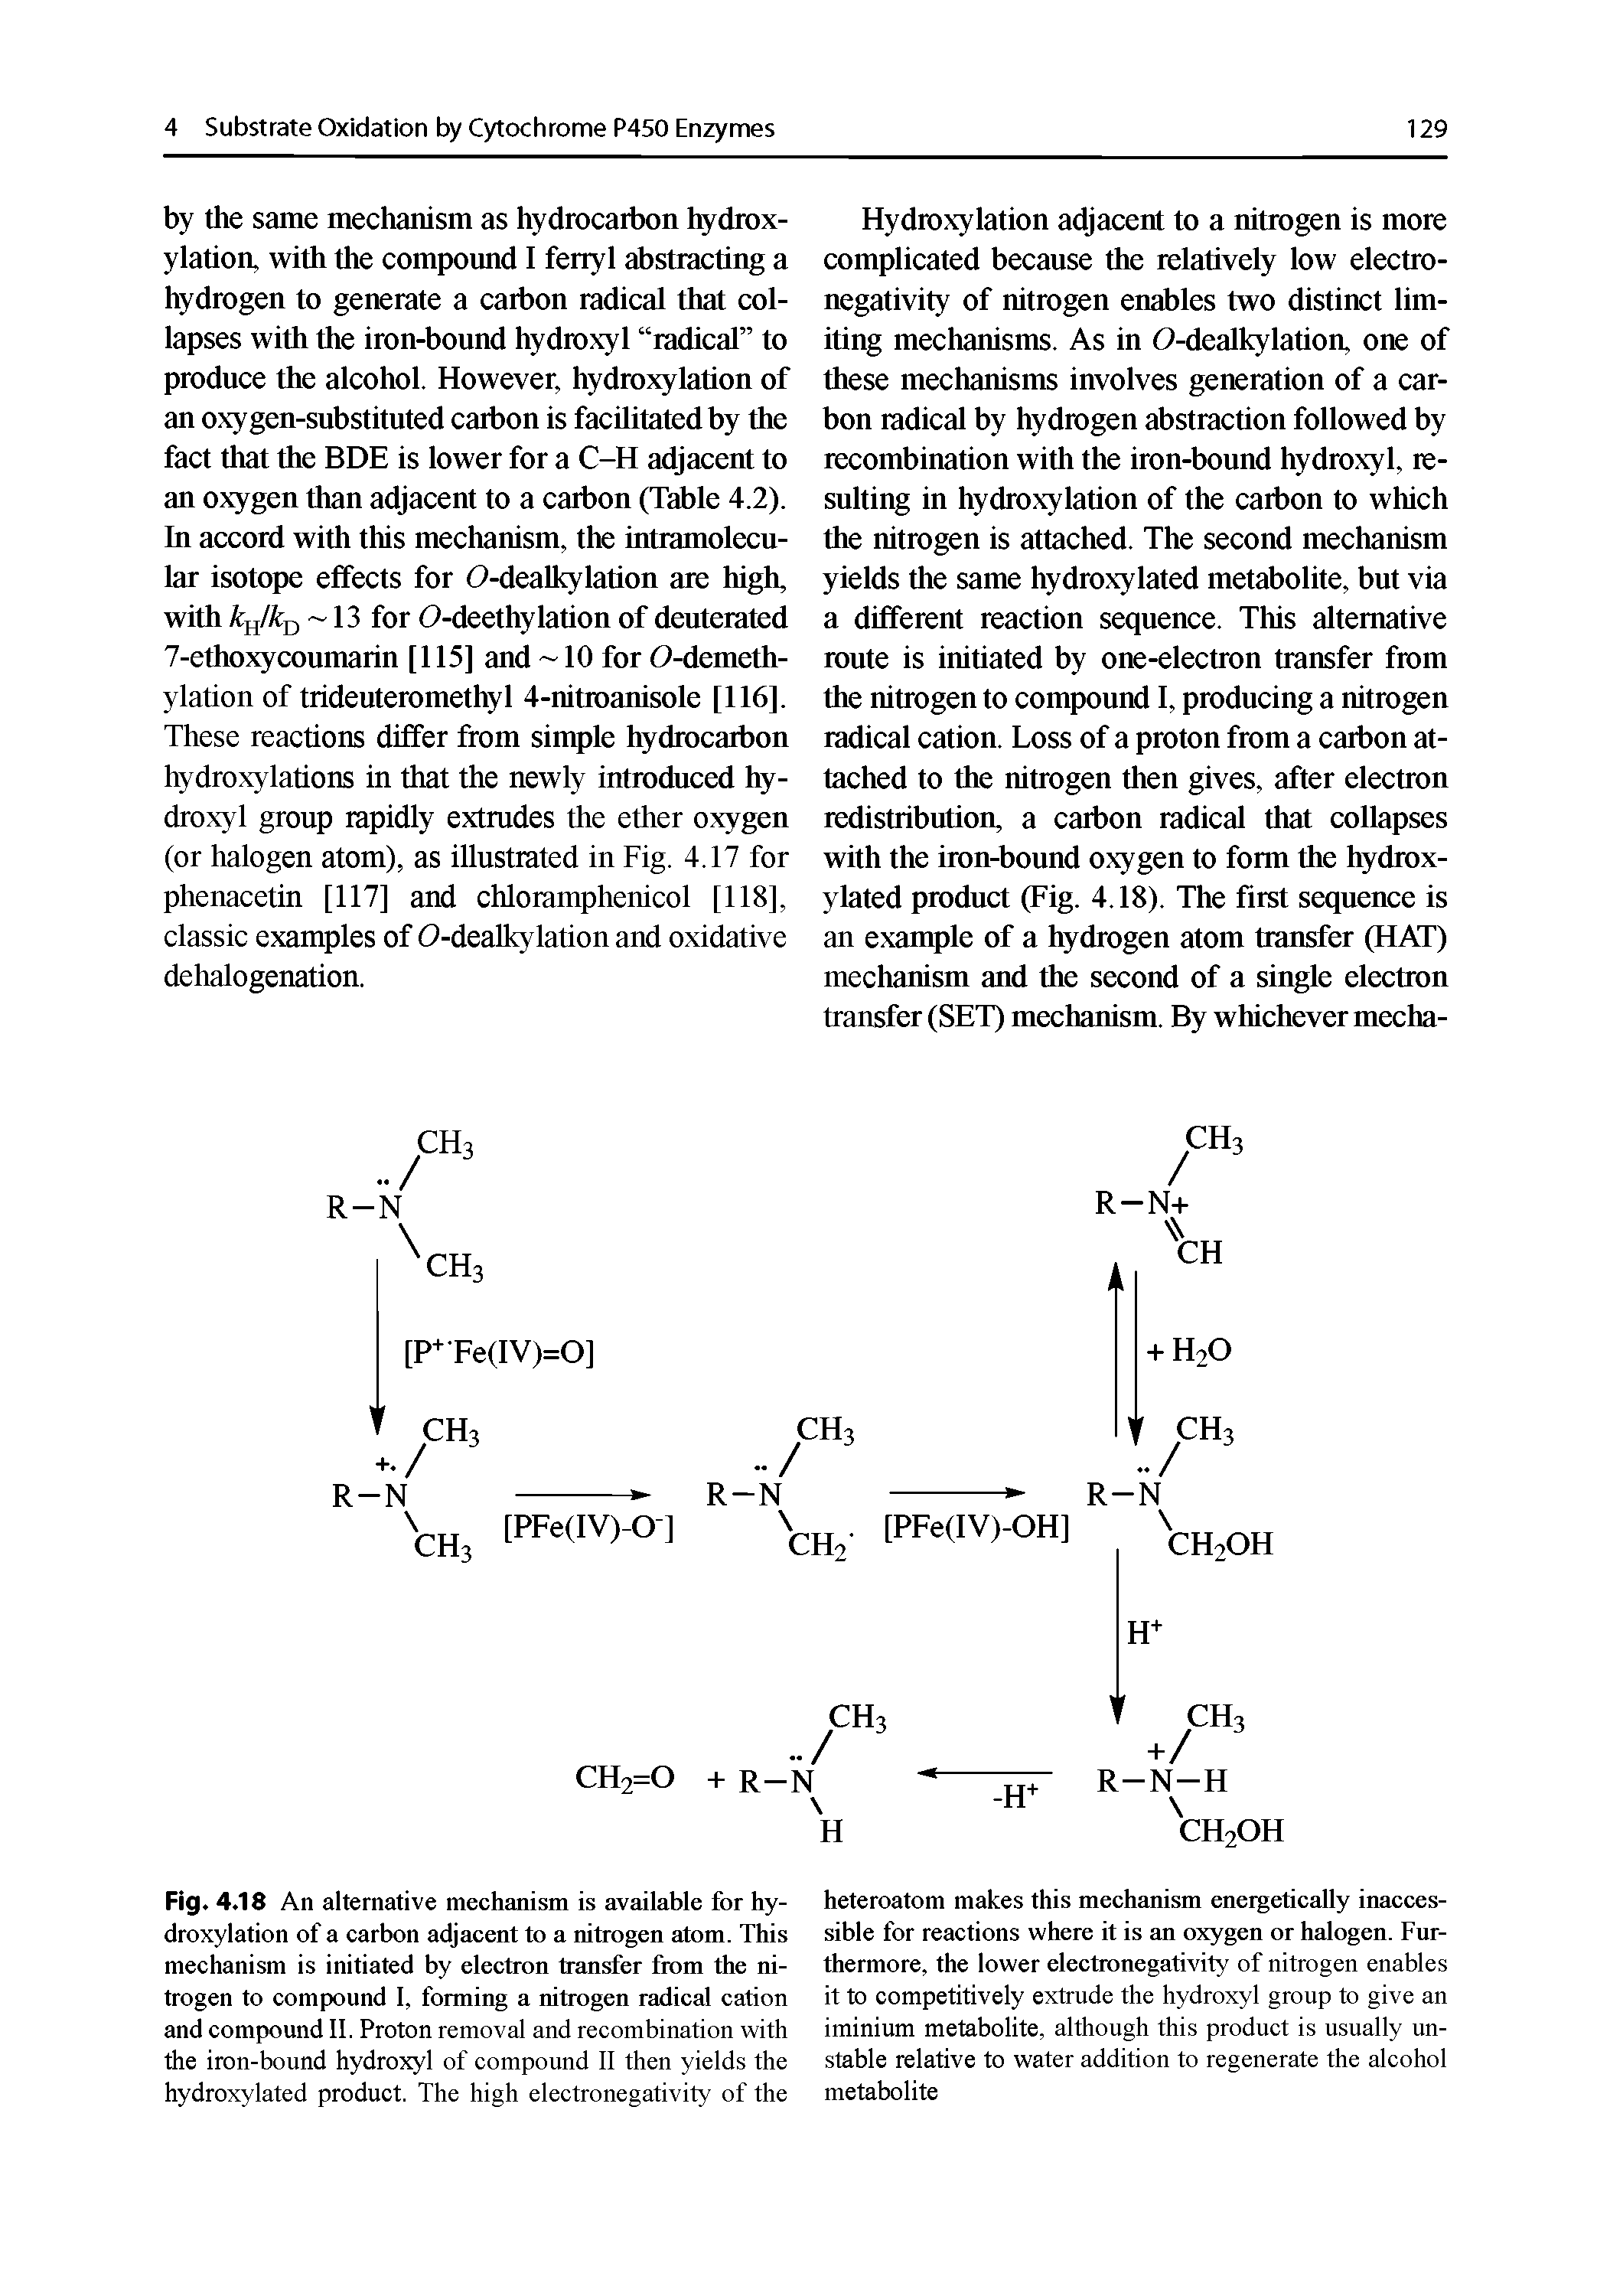 Fig. 4.18 An alternative meehanism is available for hydroxylation of a earbon adjaeent to a nitrogen atom. This meehanism is initiated by eleetron transfer fiom the nitrogen to compound I, forming a nitrogen radical cation and compound II. Proton removal and recombination with the iron-bound hydroxyl of compound II then yields the hydroxylated product. The high electronegativity of the...